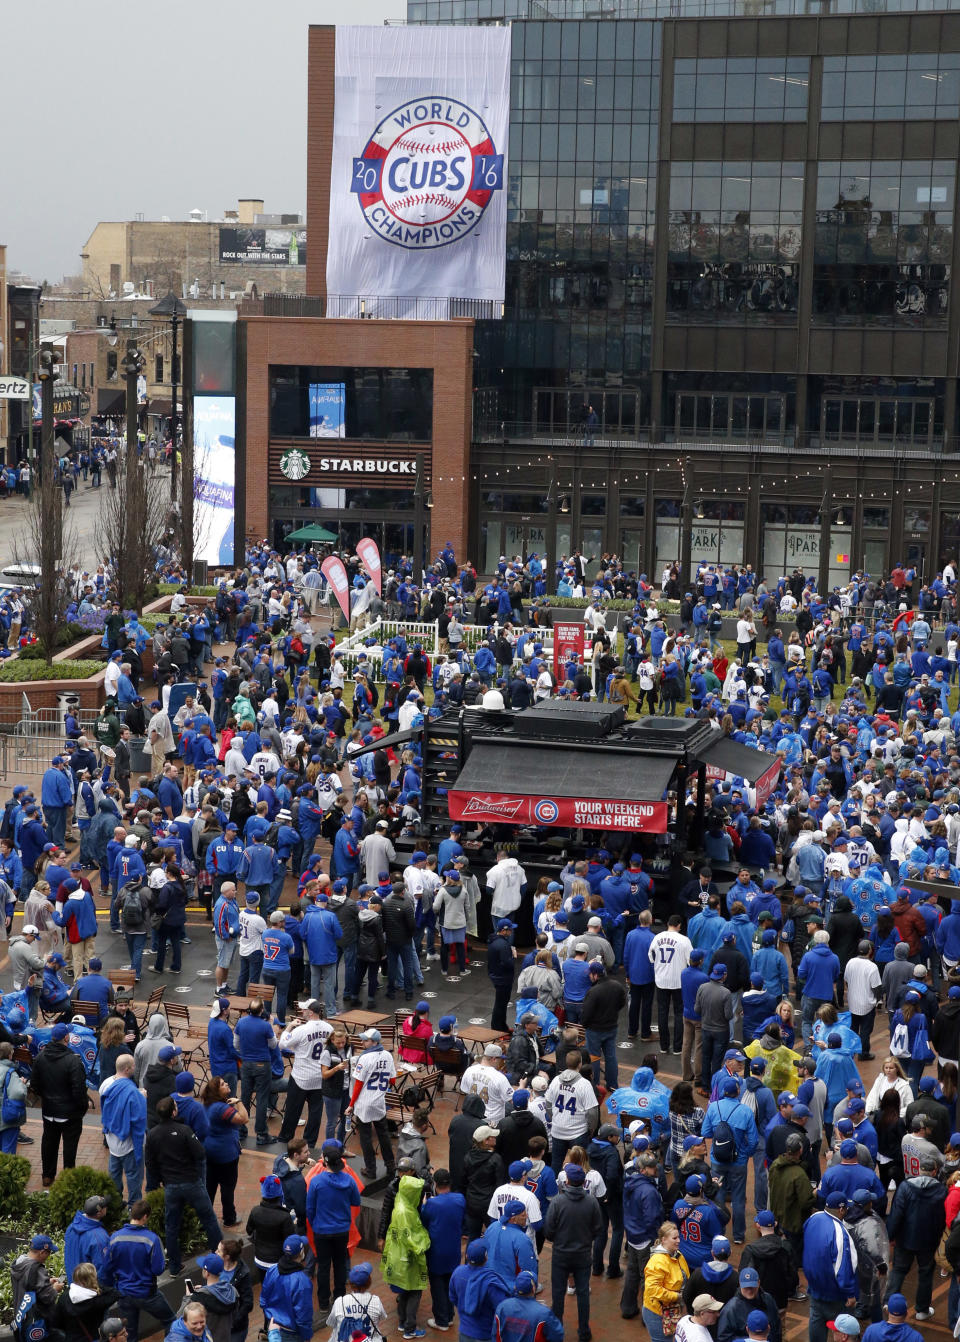 Fans gather outside in the Park at Wrigley before a baseball game between the Chicago Cubs and the Los Angeles Dodgers on home opening day, Monday, April 10, 2017, in Chicago. (AP Photo/Nam Y. Huh)